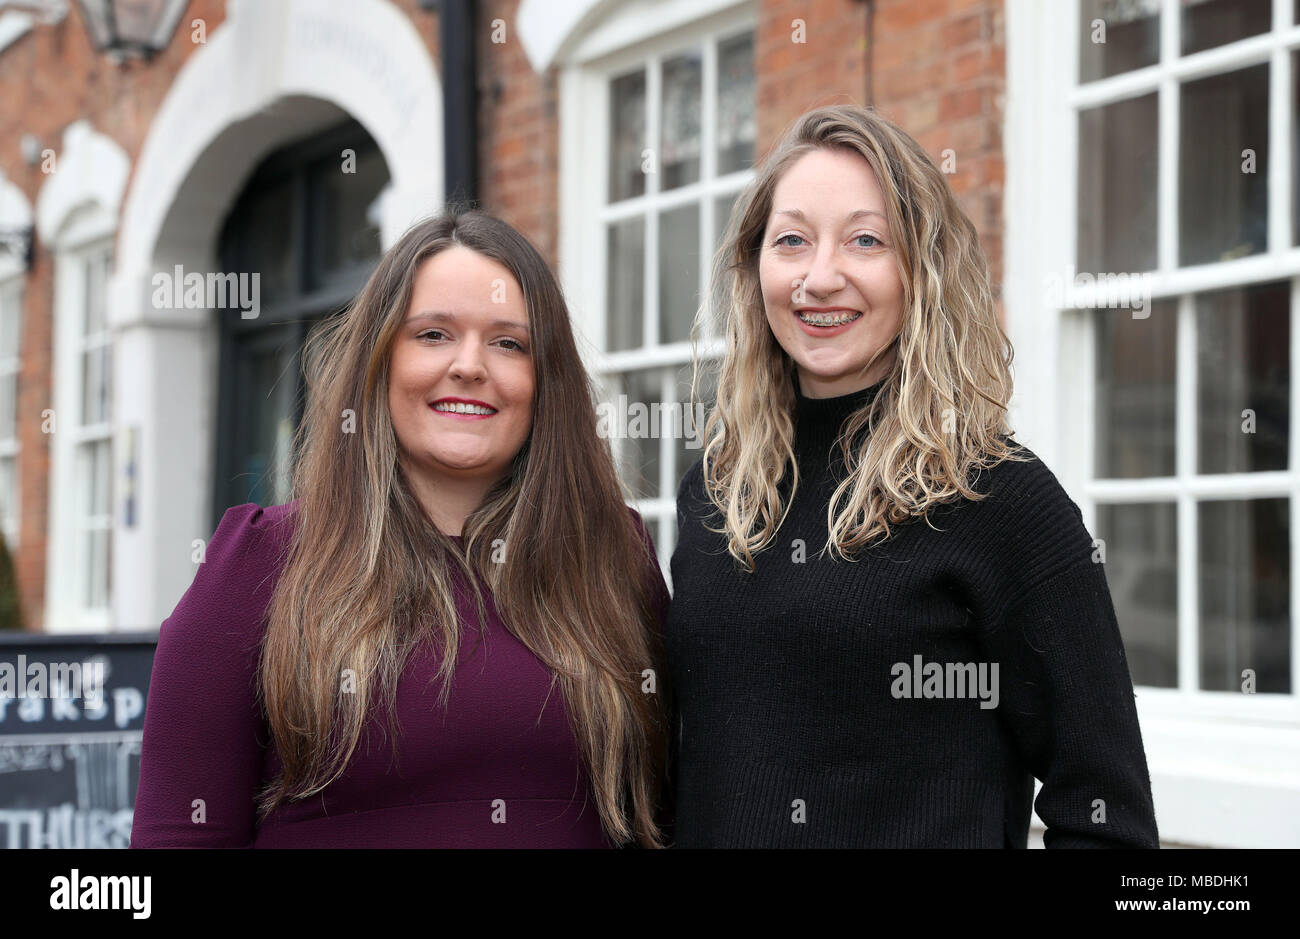 Tessa Hince (left) and Hayley Ash, both 32, from Banbury and Shipston-on-Stour who founded the Shipston Christmas Community Lunch, which caters for people who are lonely or on their own over Christmas - and are amongst those who have received an invitation to the wedding of Prince Harry and Meghan Markle at Windsor Castle next month. Stock Photo